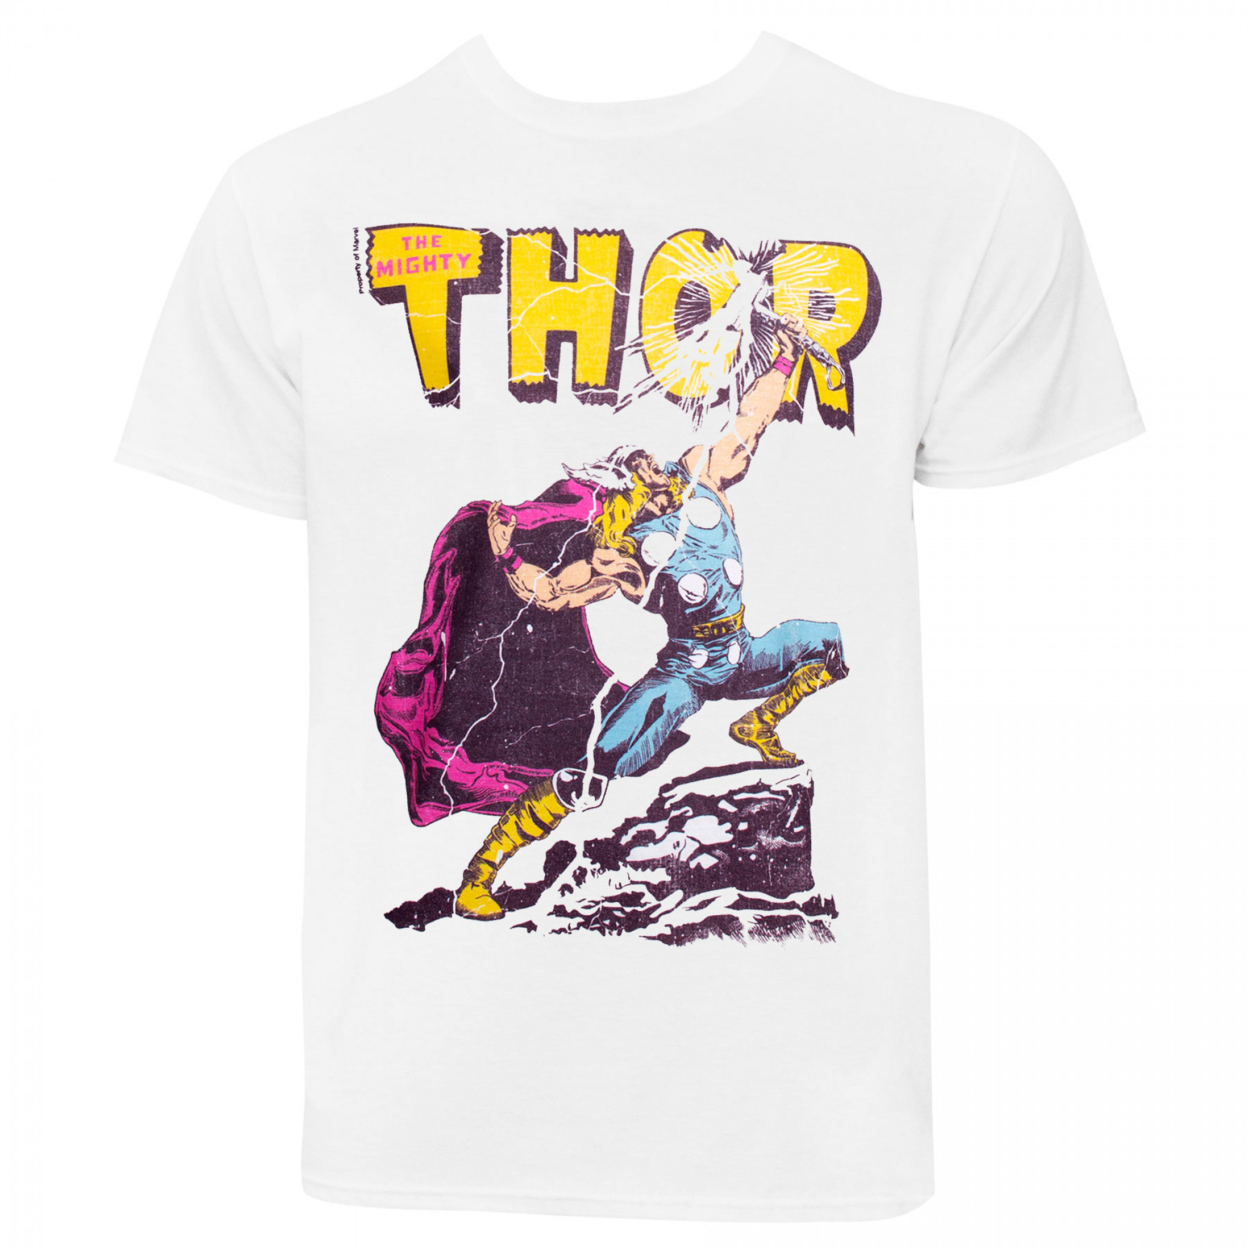 THOR The Mighty Thor Vintage T-Shirt